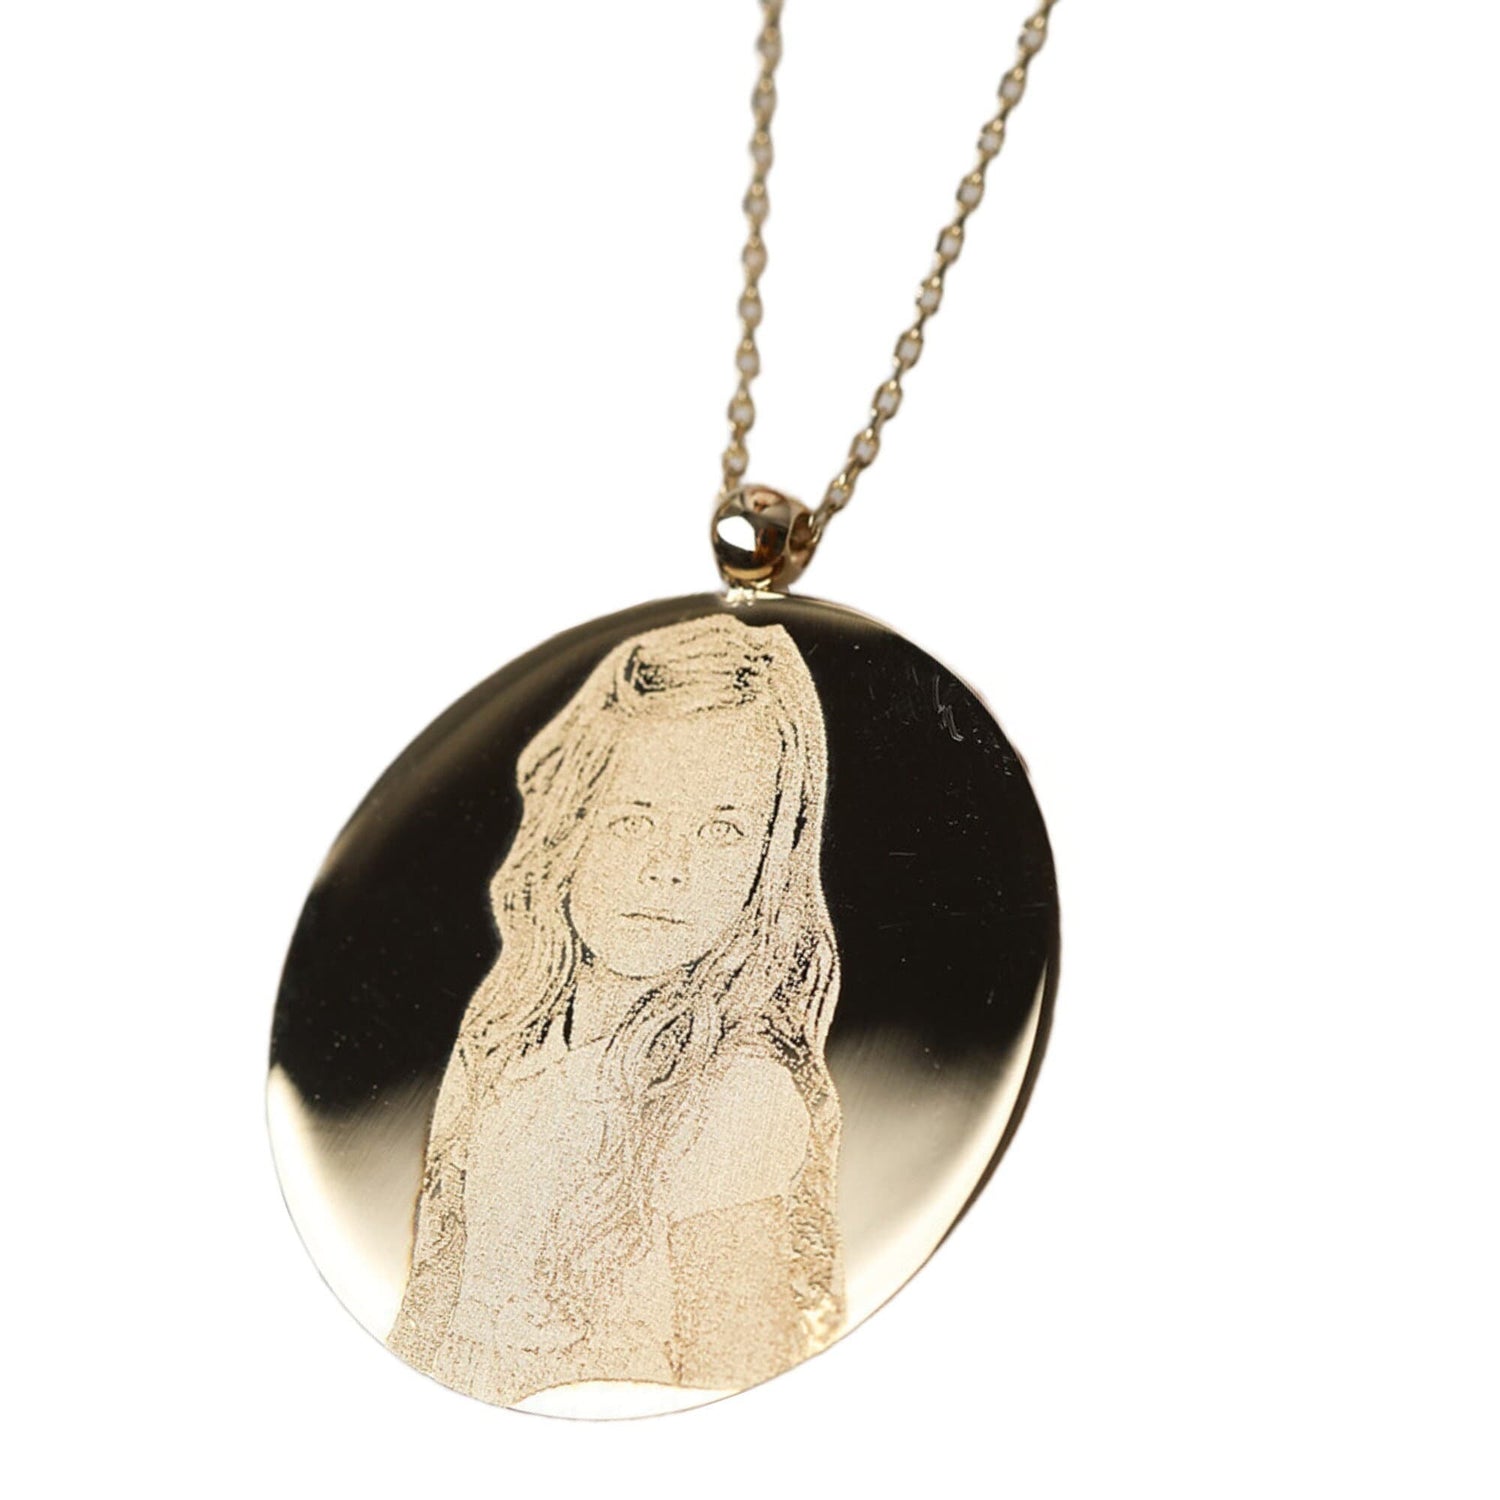 14K Solid Gold Photo Necklace displayed on a jewelry stand, featuring a rectangular pendant designed to hold a cherished photograph.